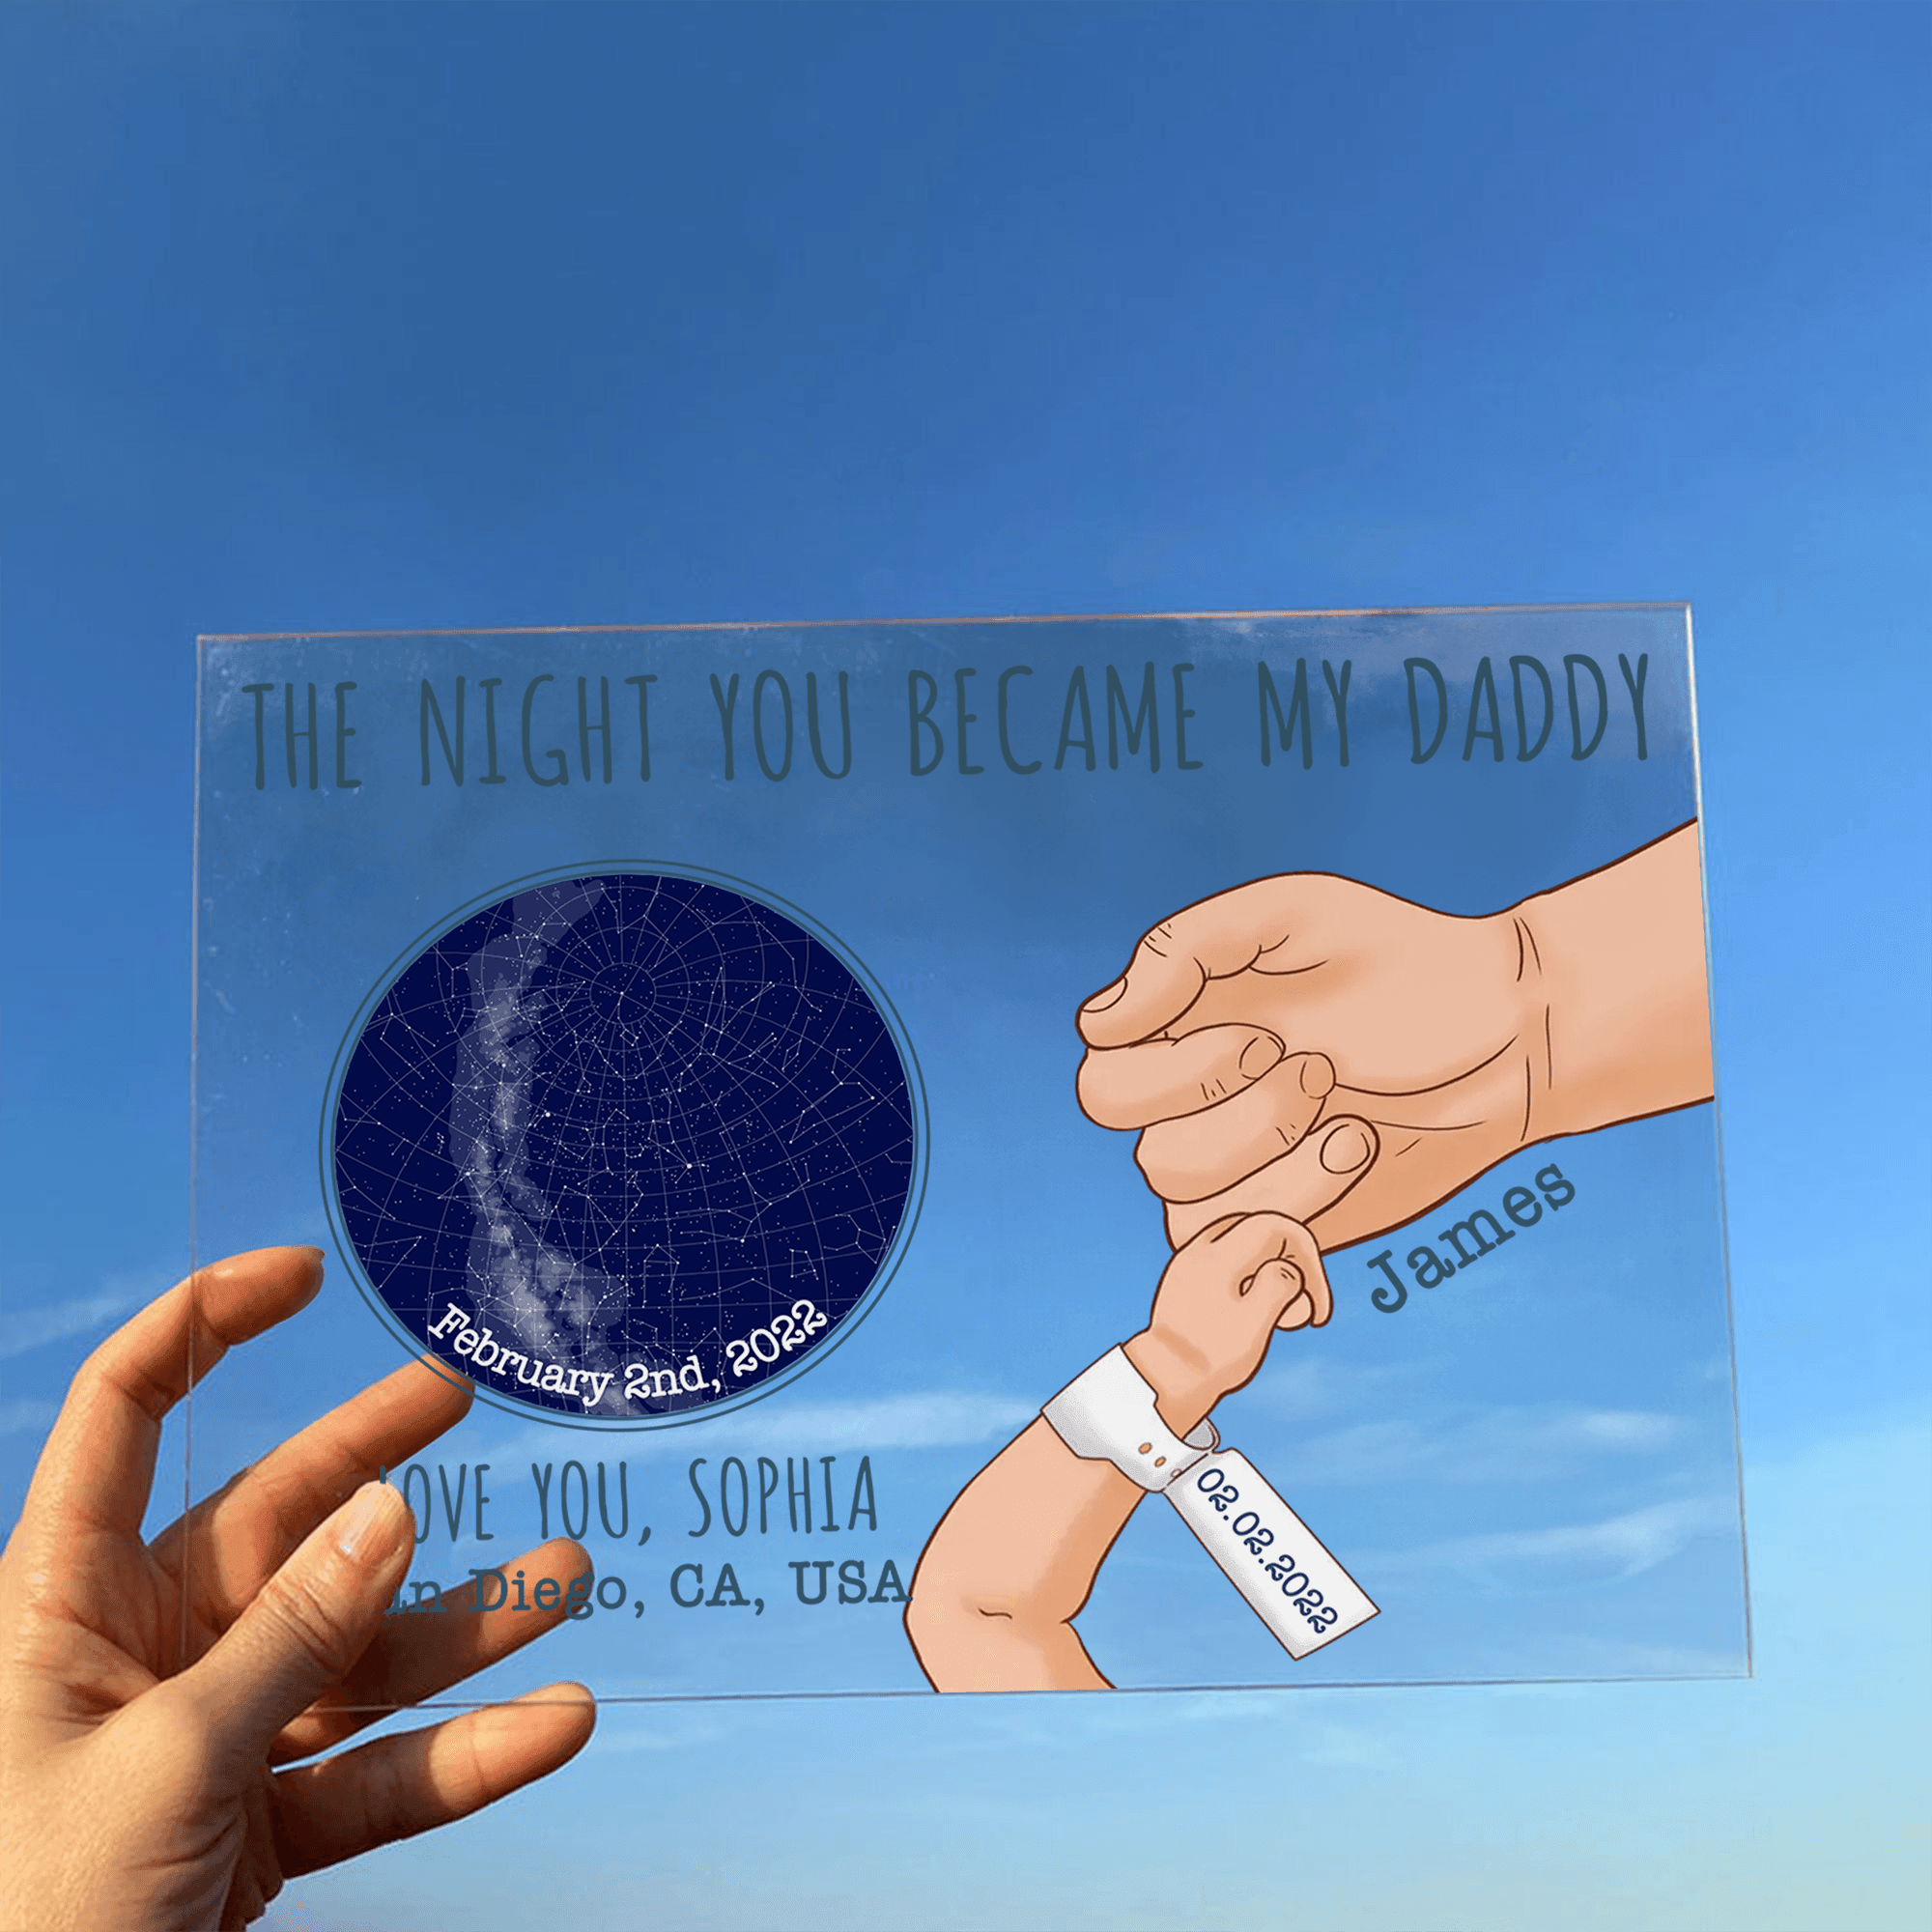 [Photo Inserted] The Night You Became My Daddy - Custom Horizontal Acrylic Plaque - Personalized Star Map Gifts for Father's Day Gift for Dad, Grandpa, Daddy, Dada, Dad Jokes - Suzitee Store